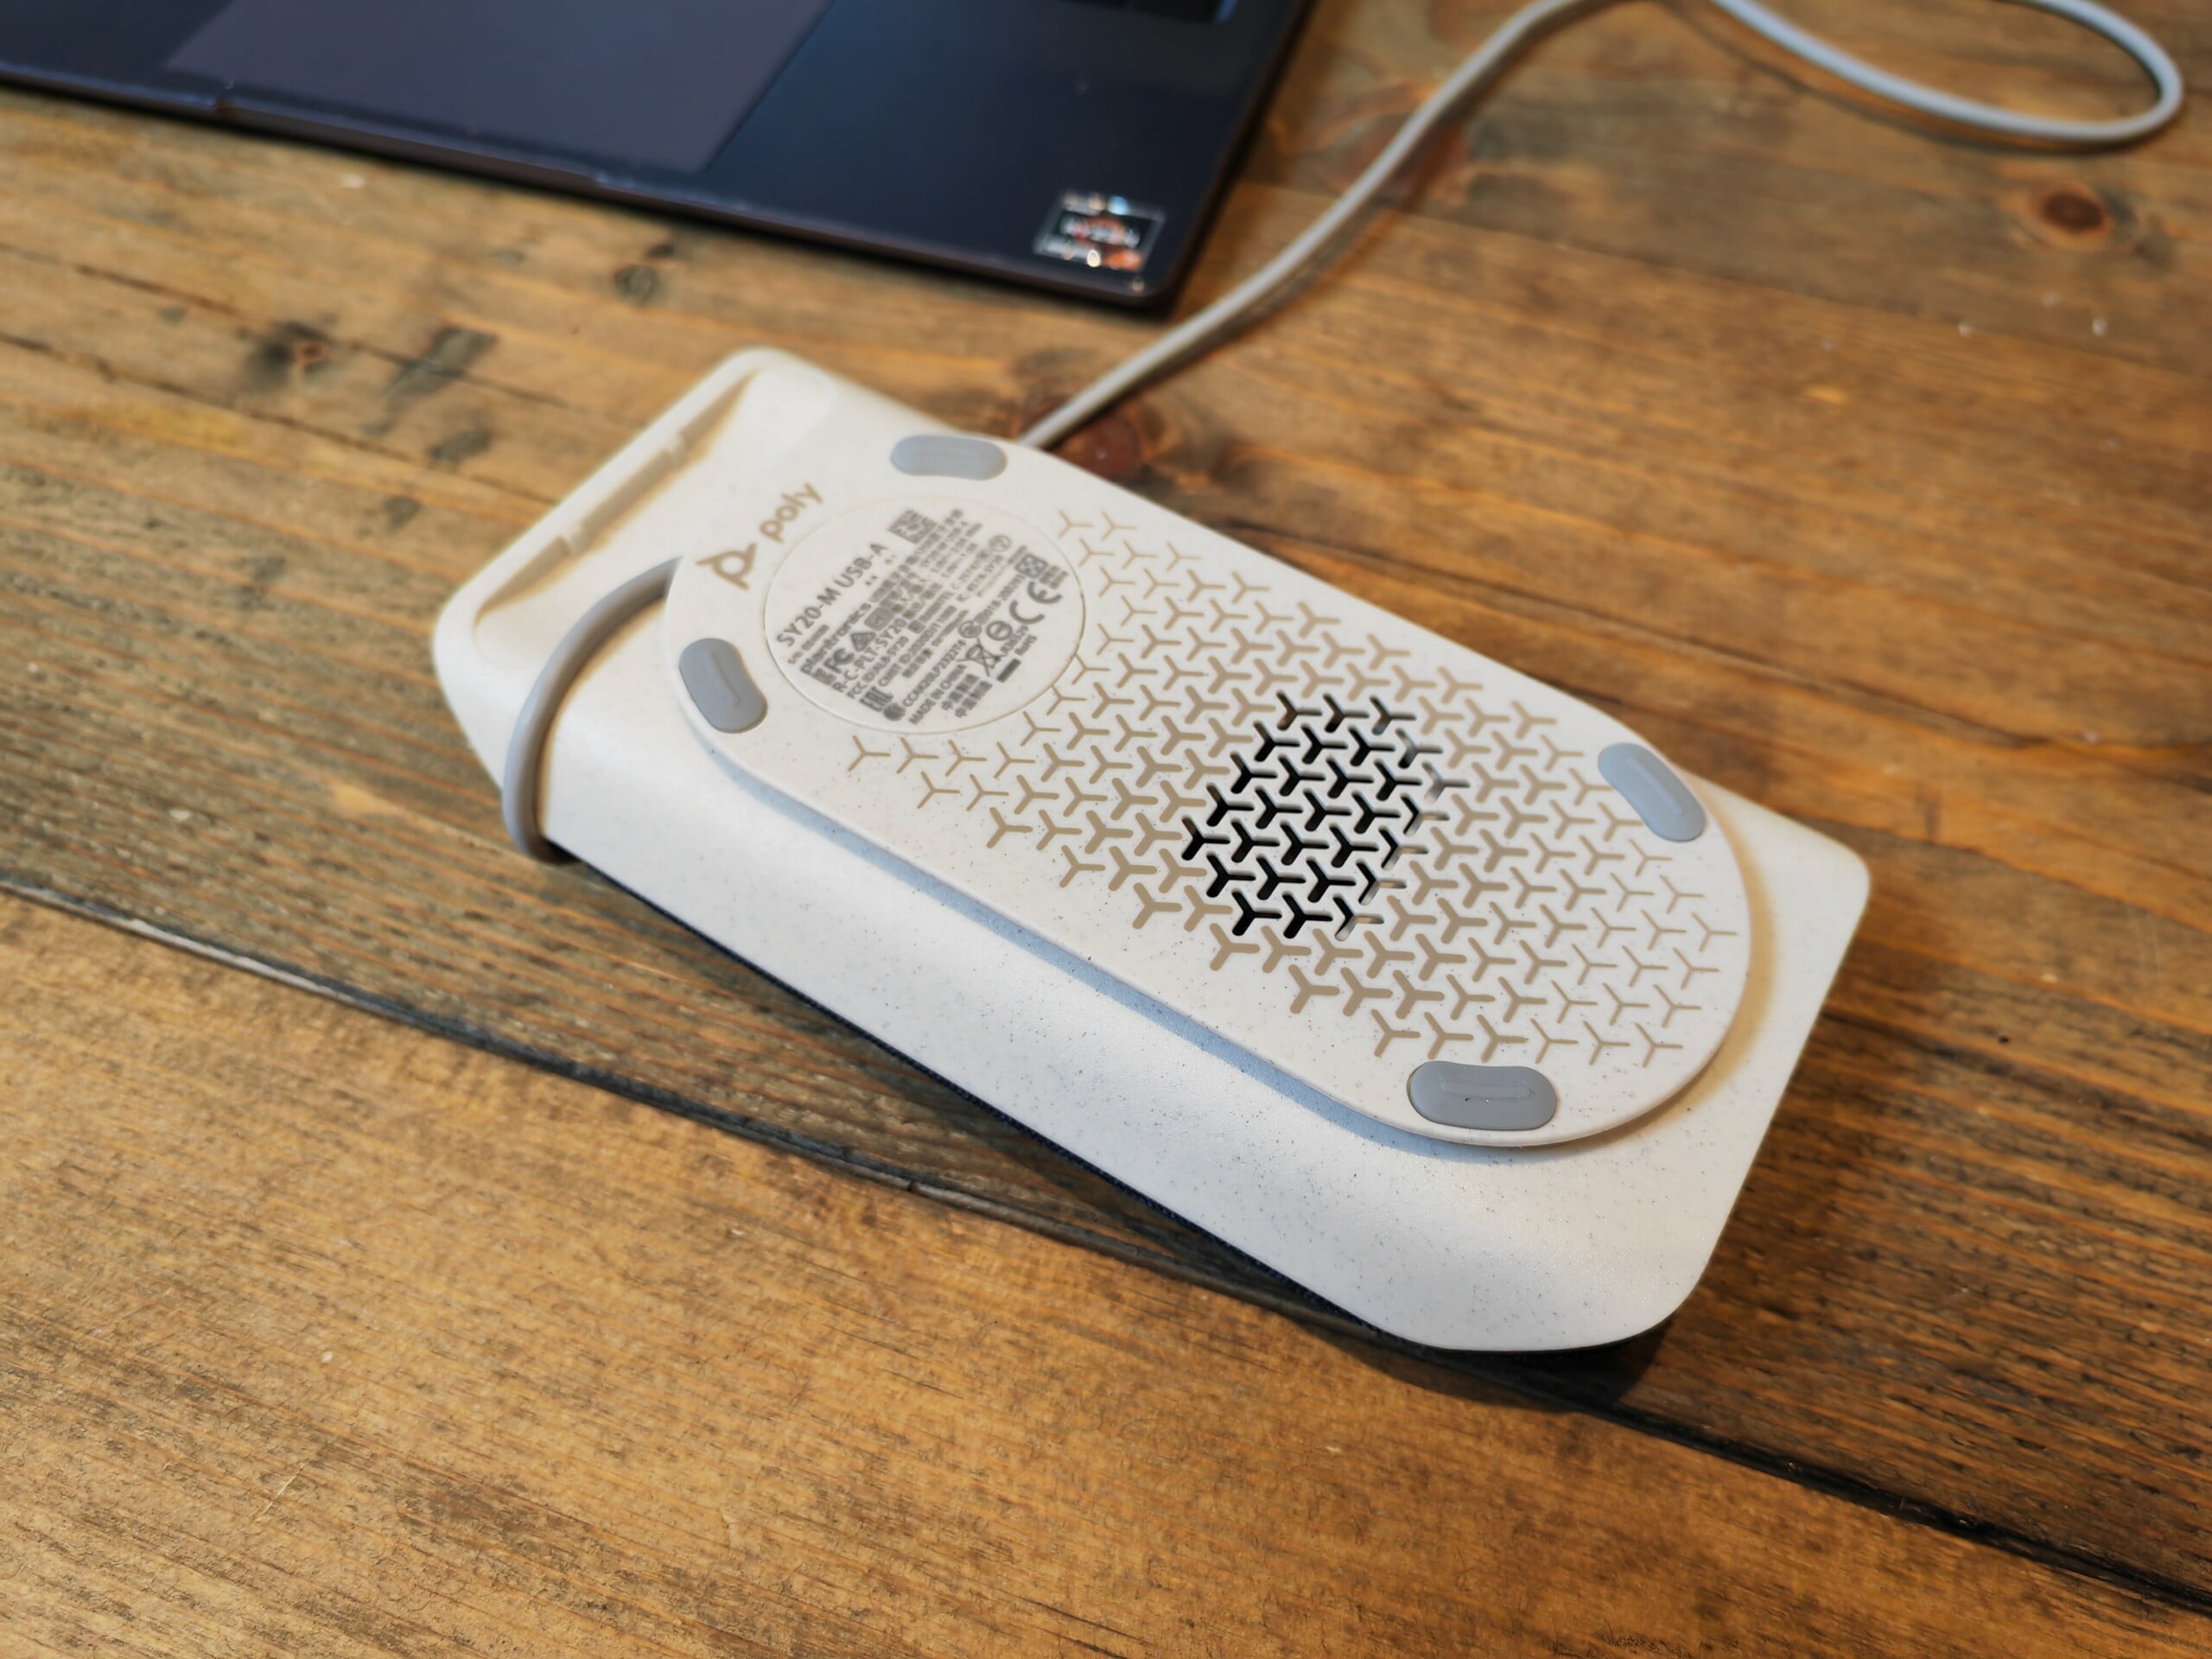 Poly Sync 20 Smart Speakerphone Review 2 scaled - Poly Sync 20+ Smart Speakerphone Review